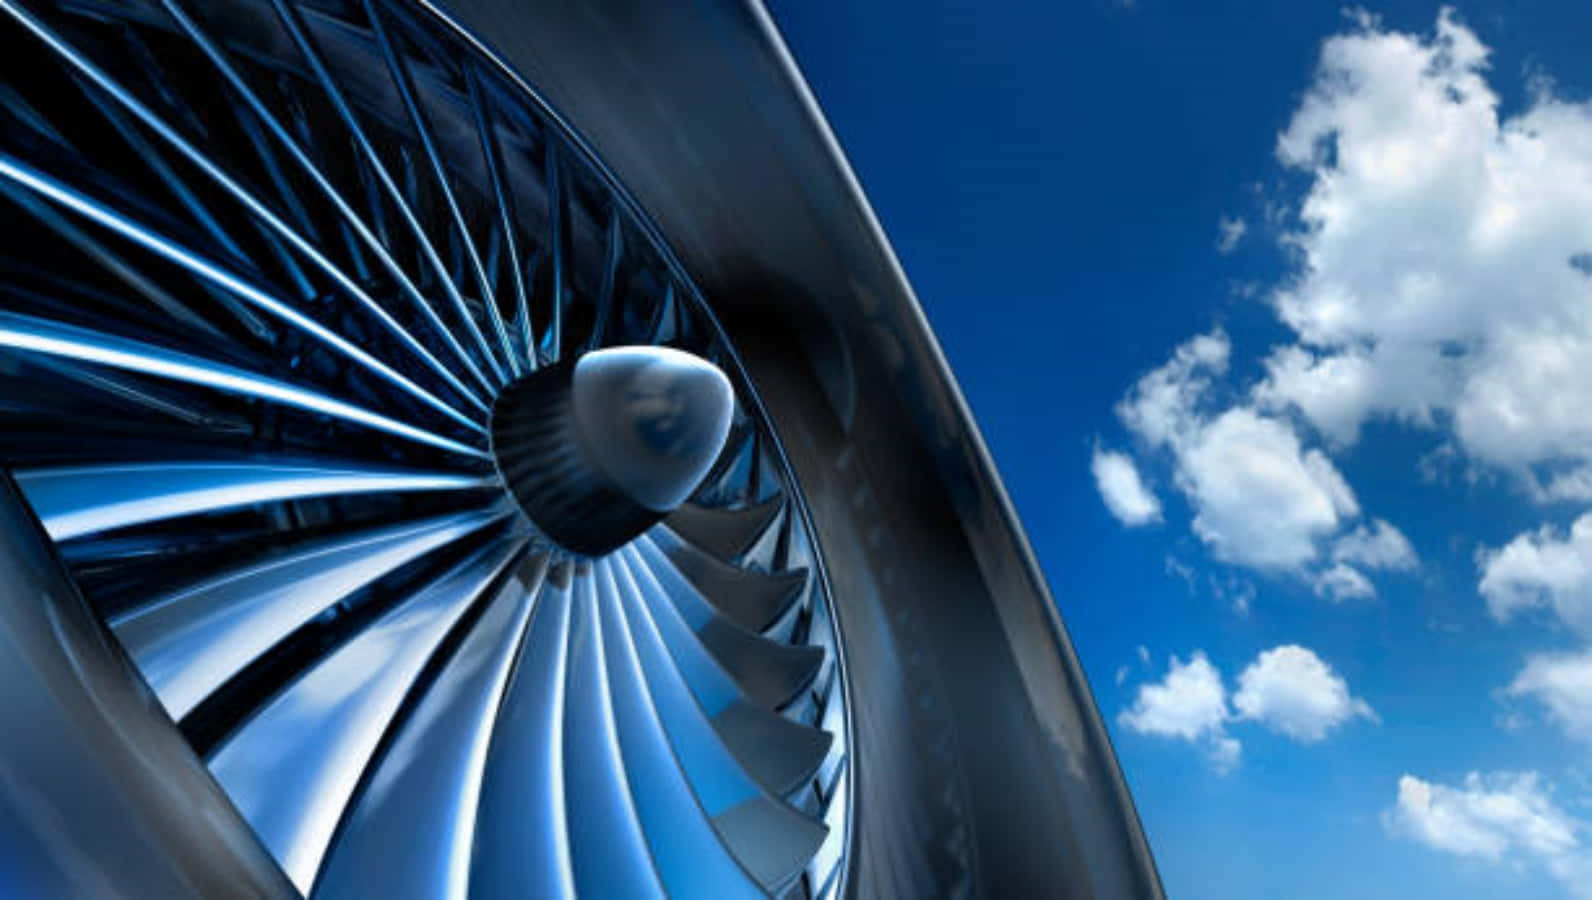 Powerful Jet Engine in Operation Wallpaper